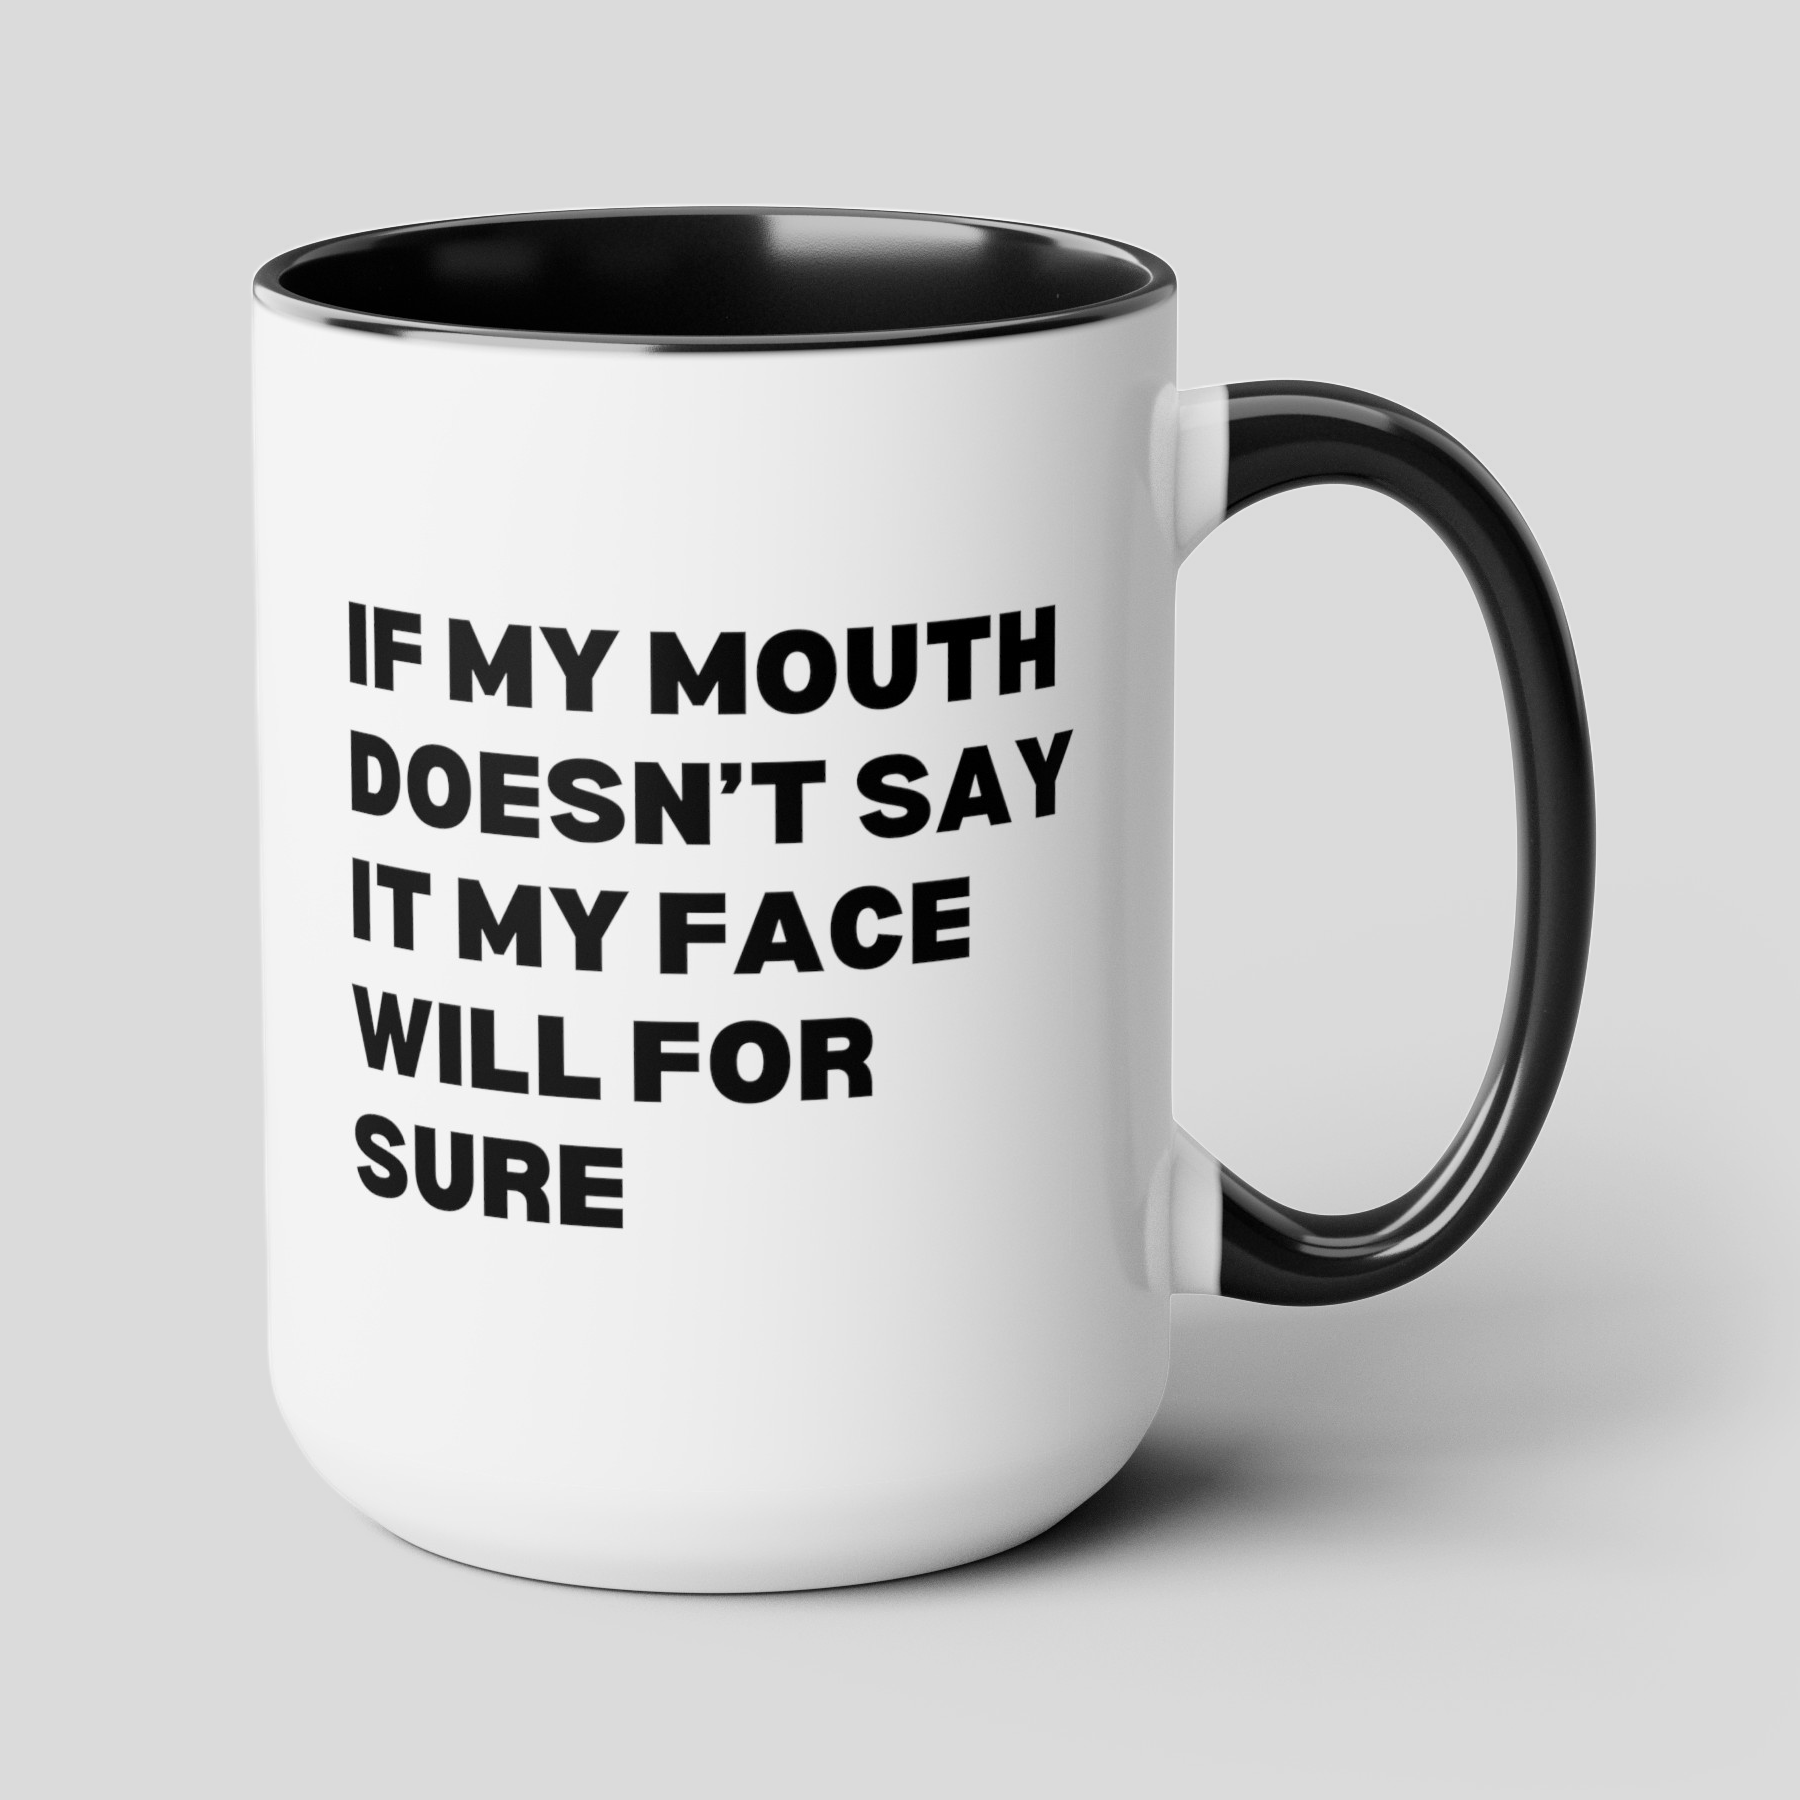 If My Mouth Doesn't Say It My Face Will For Sure 15oz white with with black accent large big funny coffee mug tea cup gift for her best friend office sarcastic sarcasm coworker waveywares wavey wares wavywares wavy wares cover